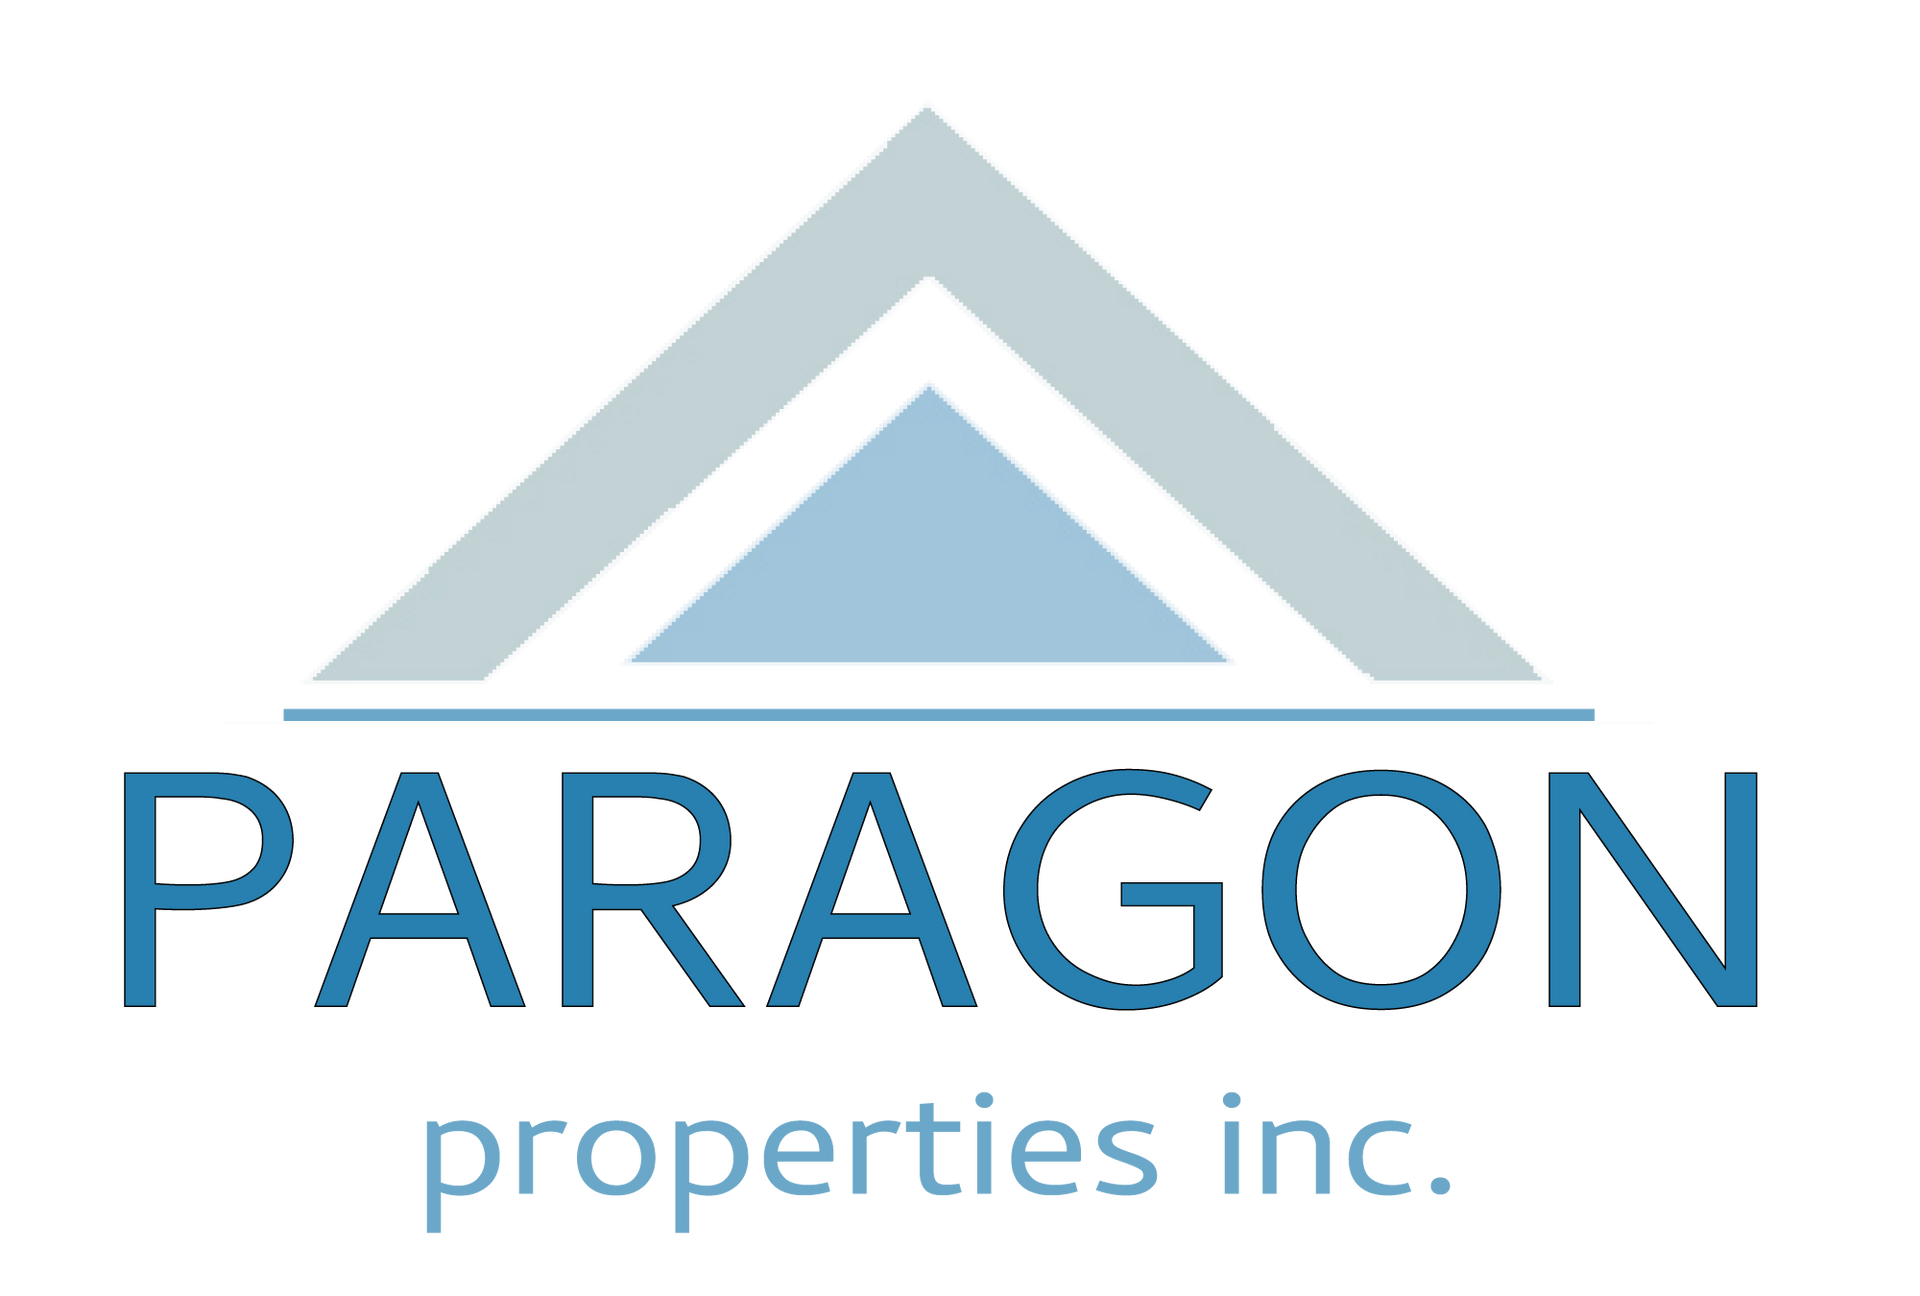 Paragon 28 Announces Appointment of Meghan Scanlon to Board of Directors -  Ortho Consulting Group